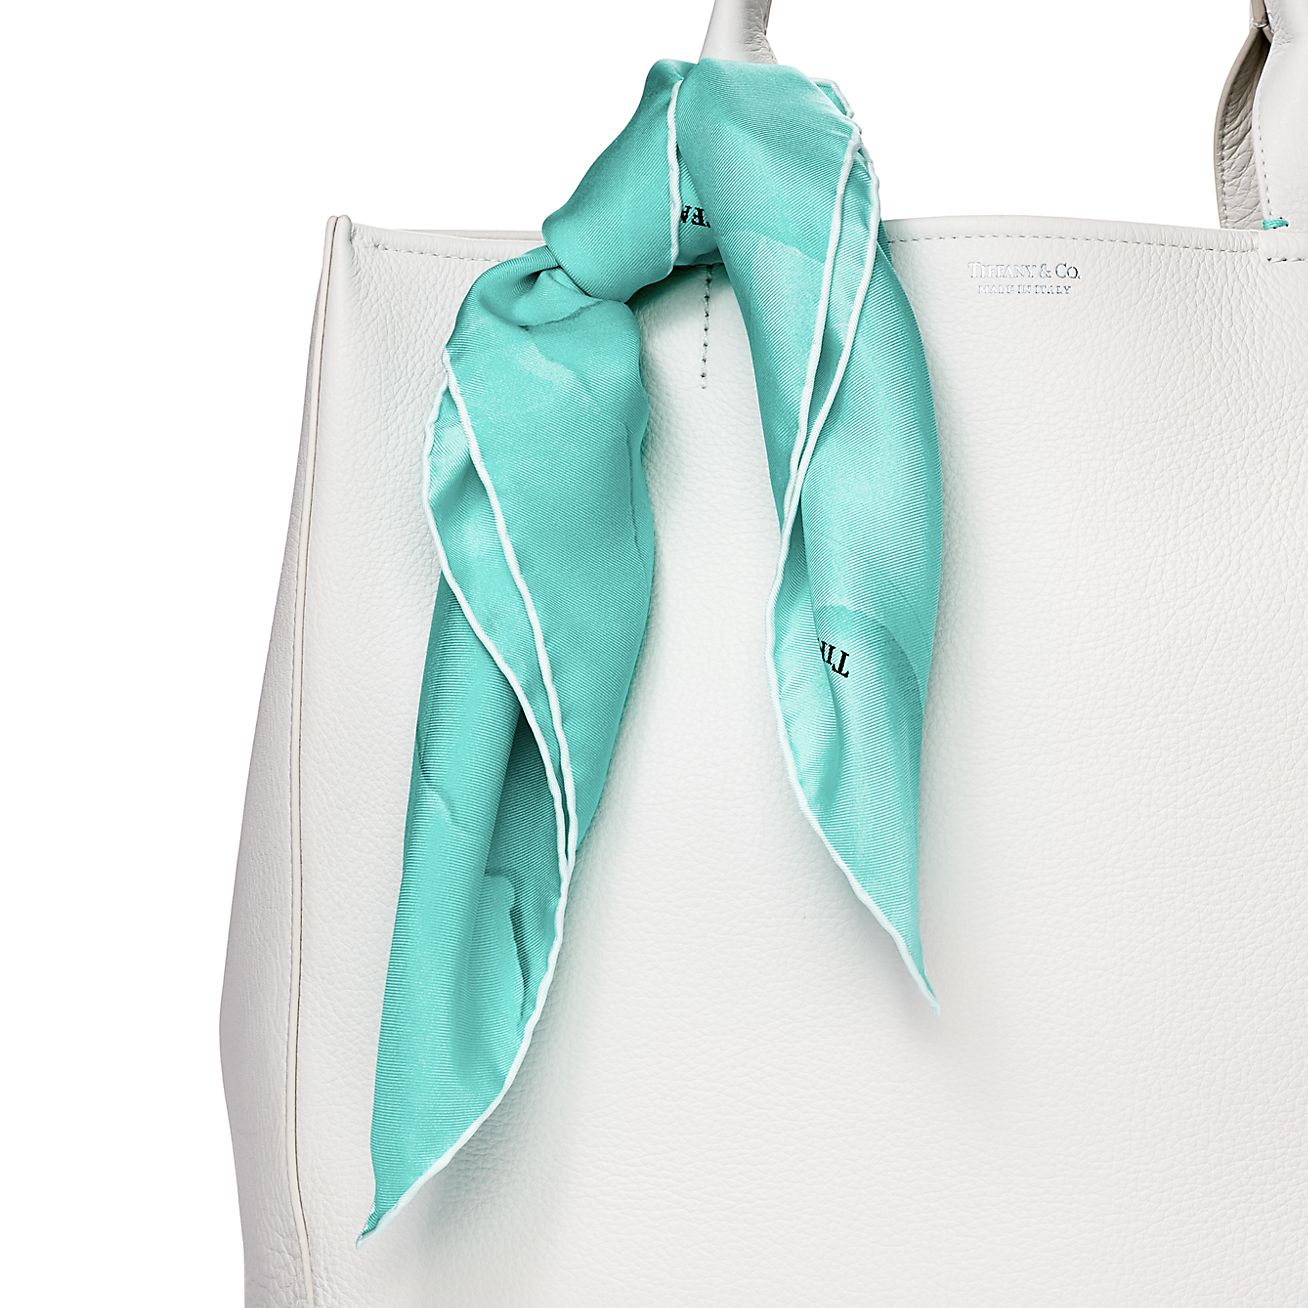 tiffany and co scarf